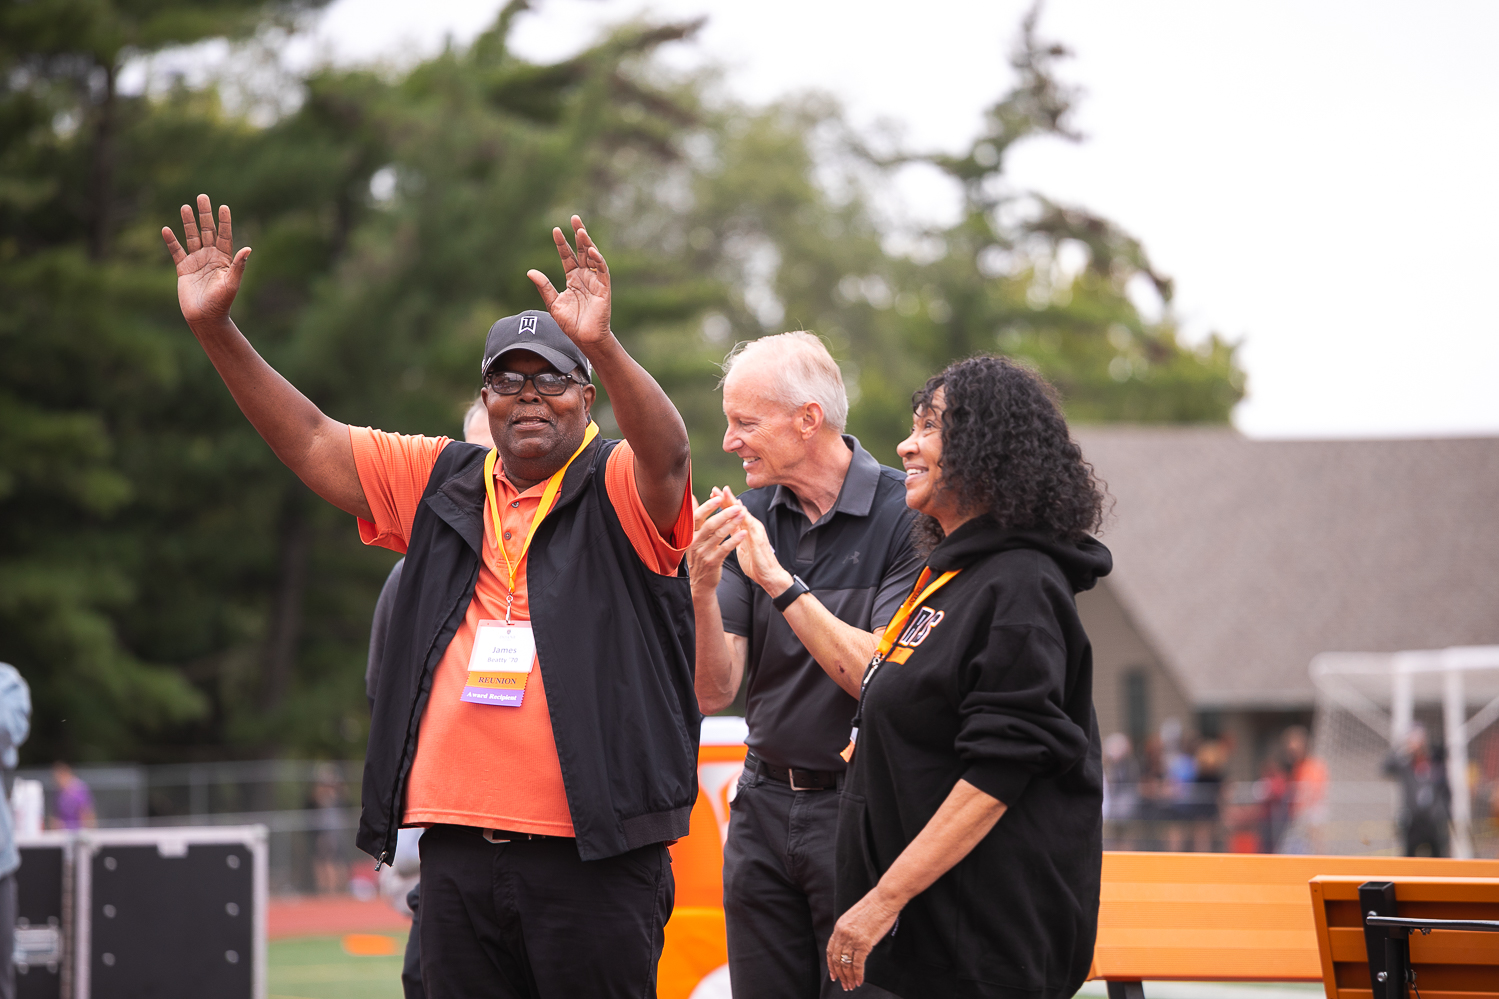 Jim Beatty holds up both arms to wave to the crowd at the 2021 Doane Homecoming football game. Behind him are Dr. Roger Hughes, Doane president, and Beatty's spouse, Earlene Beatty. 